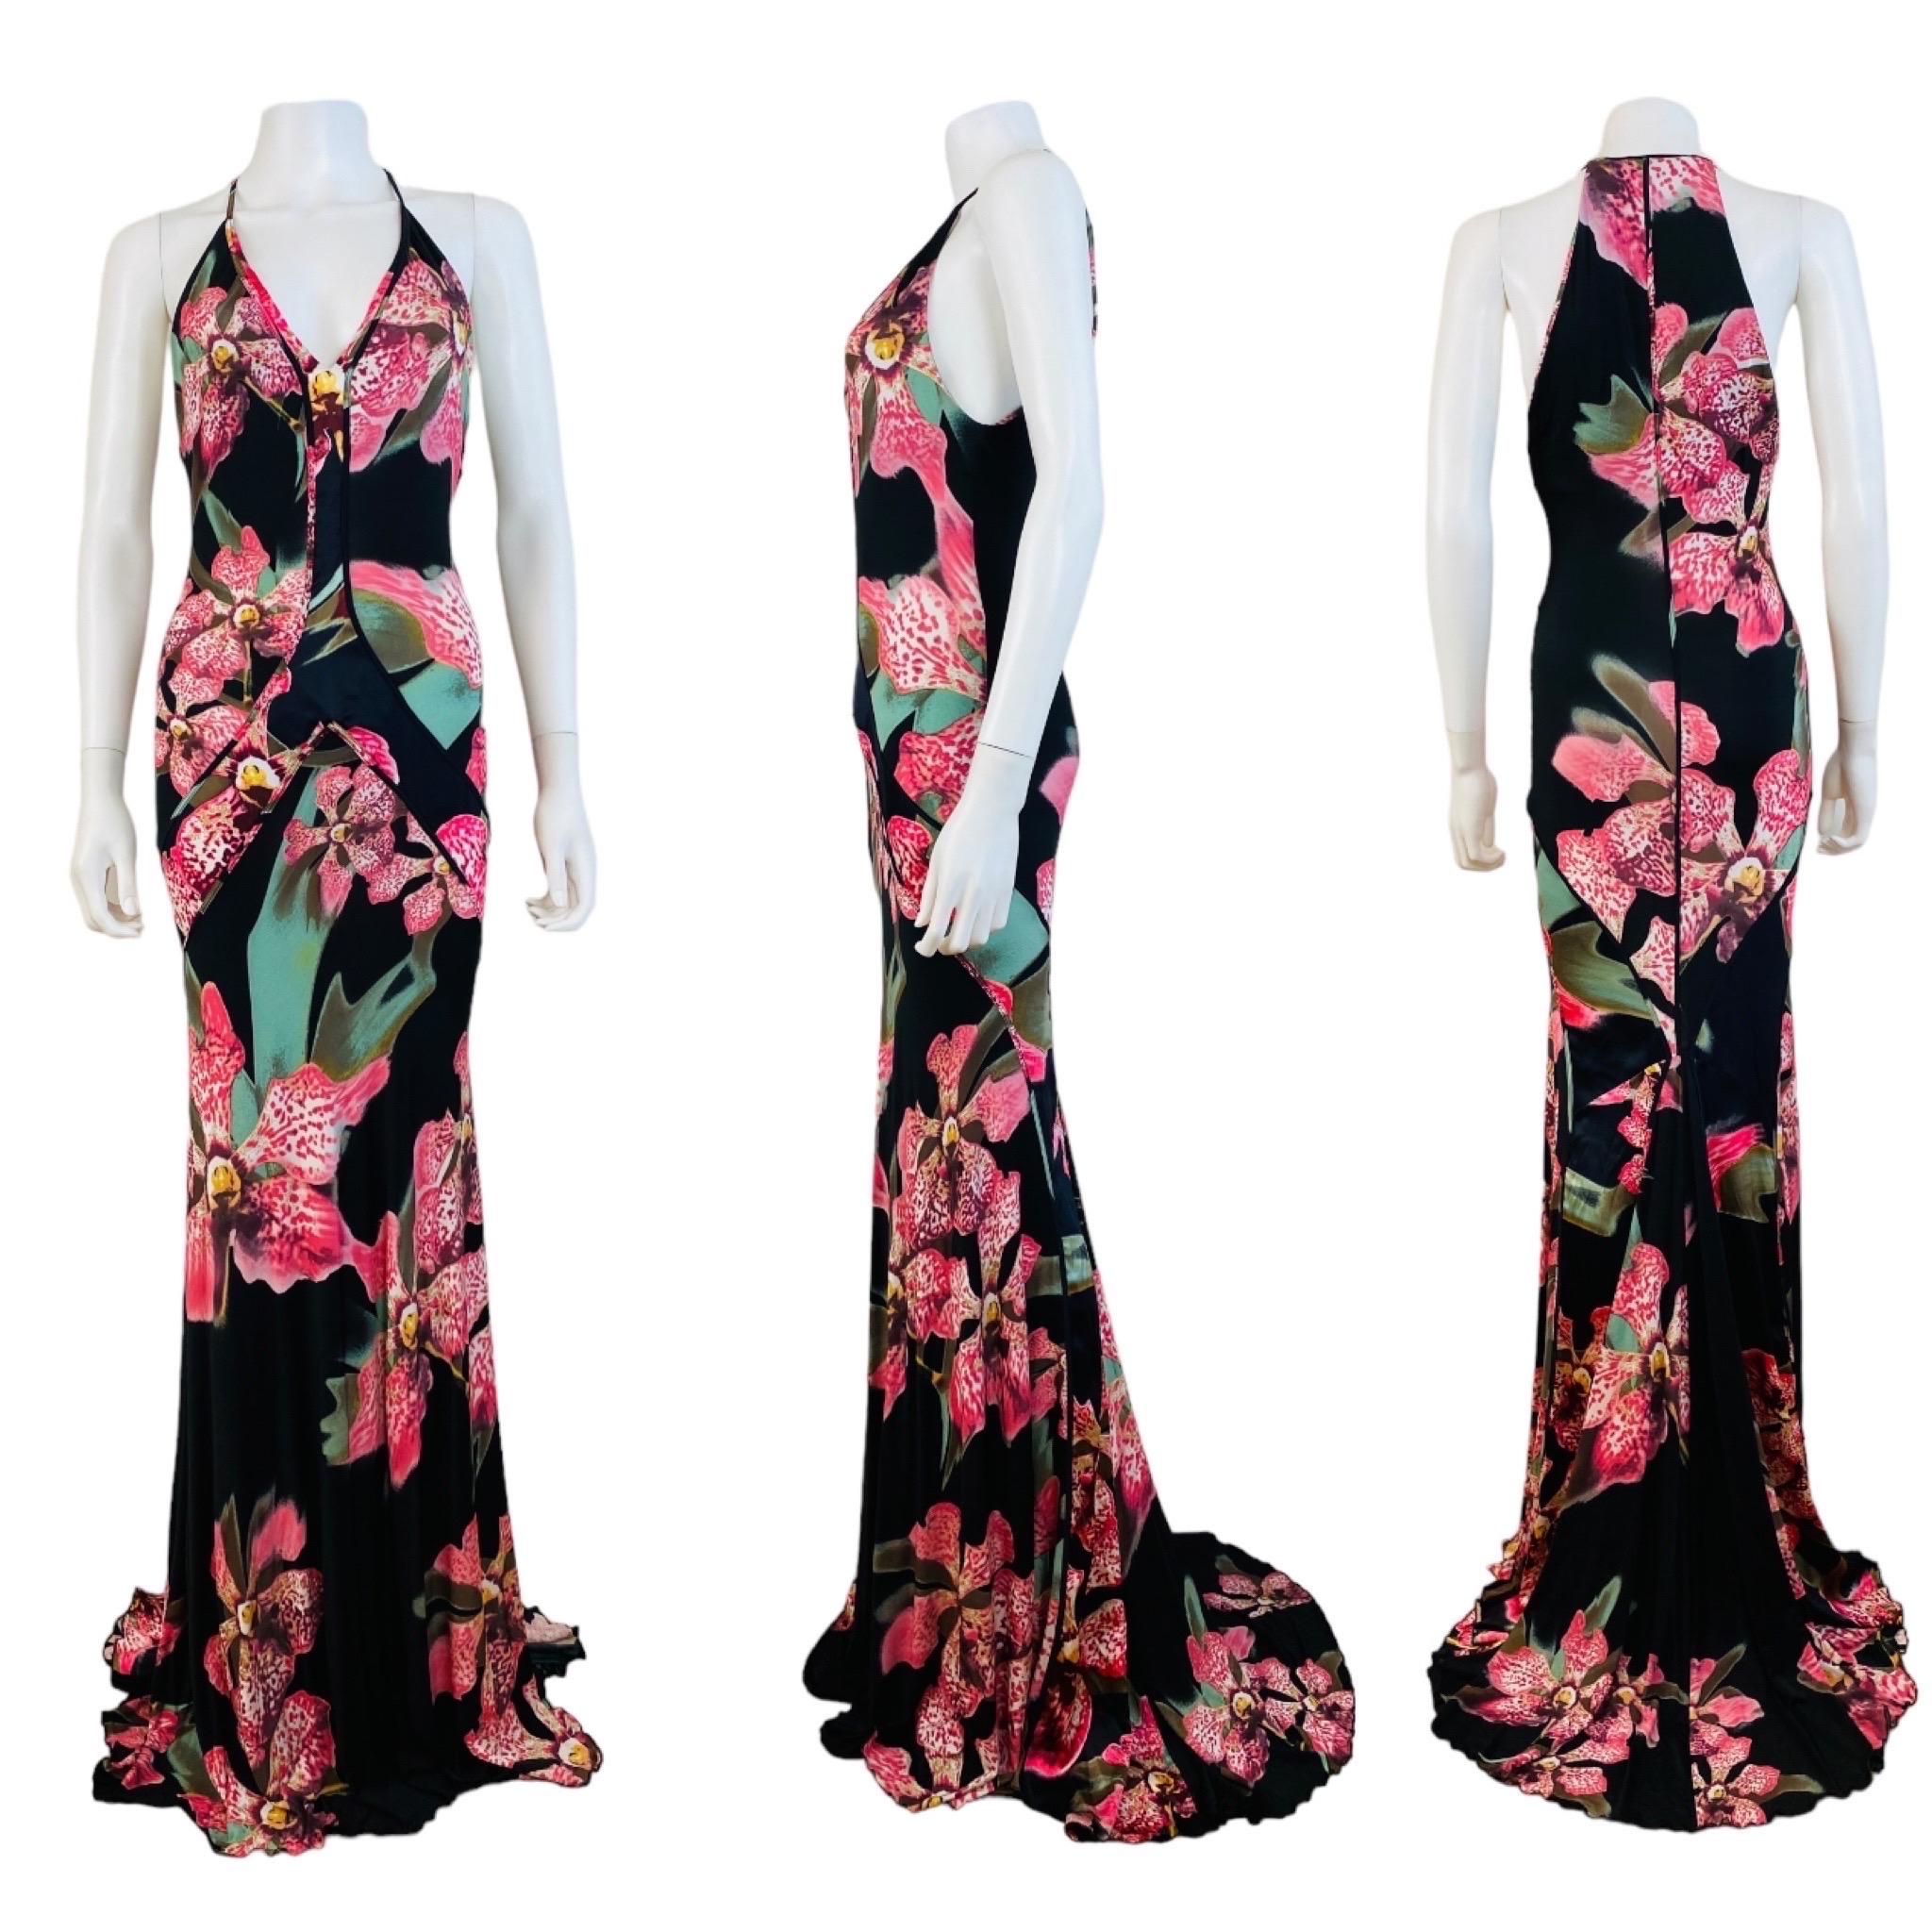 Incredible F/W 2004 Roberto Cavalli Dress 
Black stretch fabric with oversized pink tiger orchid print throughout
Gold glitter accents on fabric
Halter style neckline with thin shoulder straps
Fitted bust with built in bust support
V neckline
Wiggle